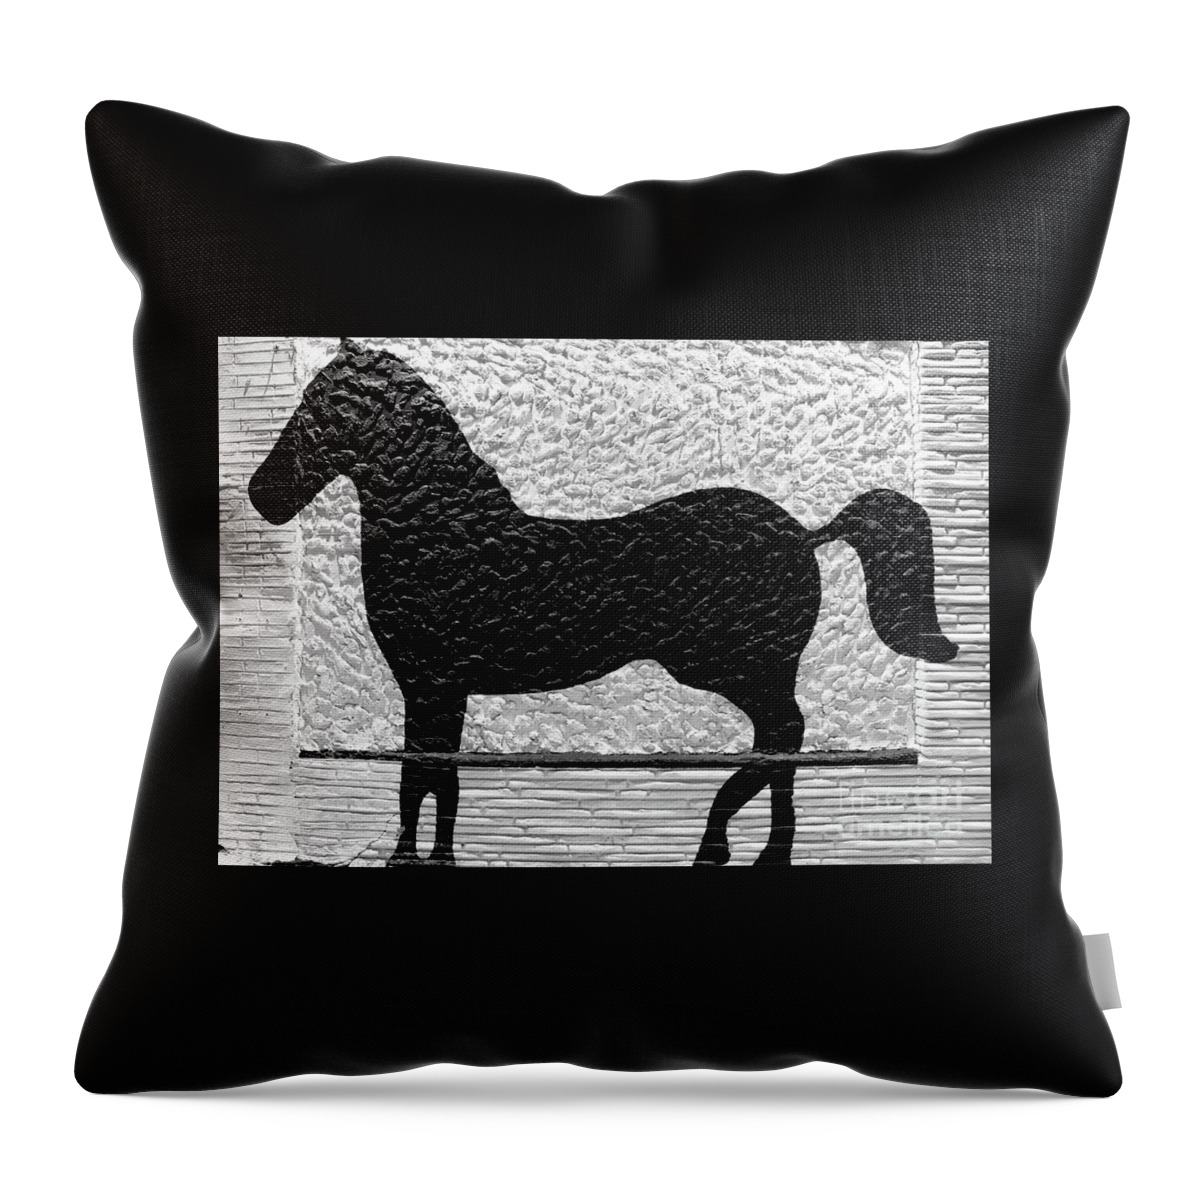 Asbury Park Throw Pillow featuring the photograph Painted Black - Stone Pony by Colleen Kammerer